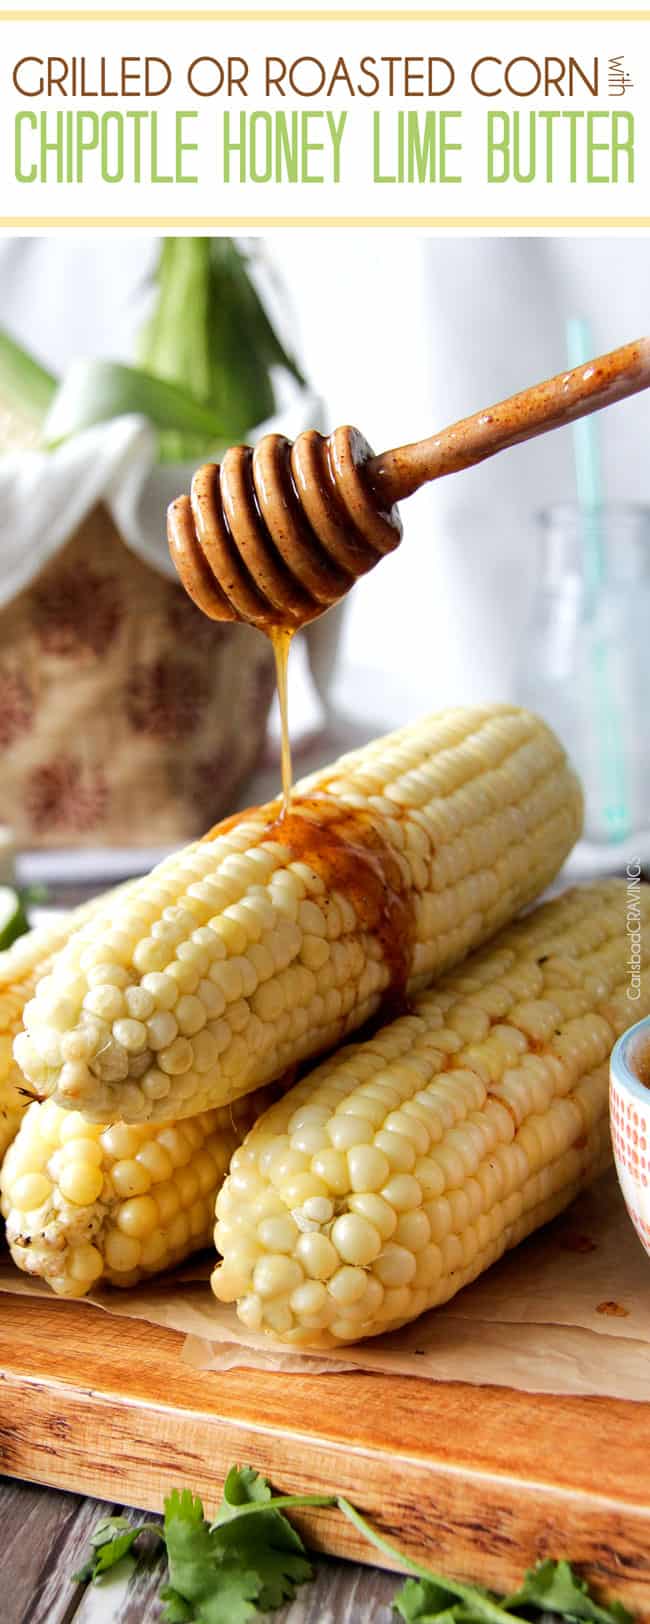 Grilled Corn on the Cob with Chipotle Honey Lime Butter